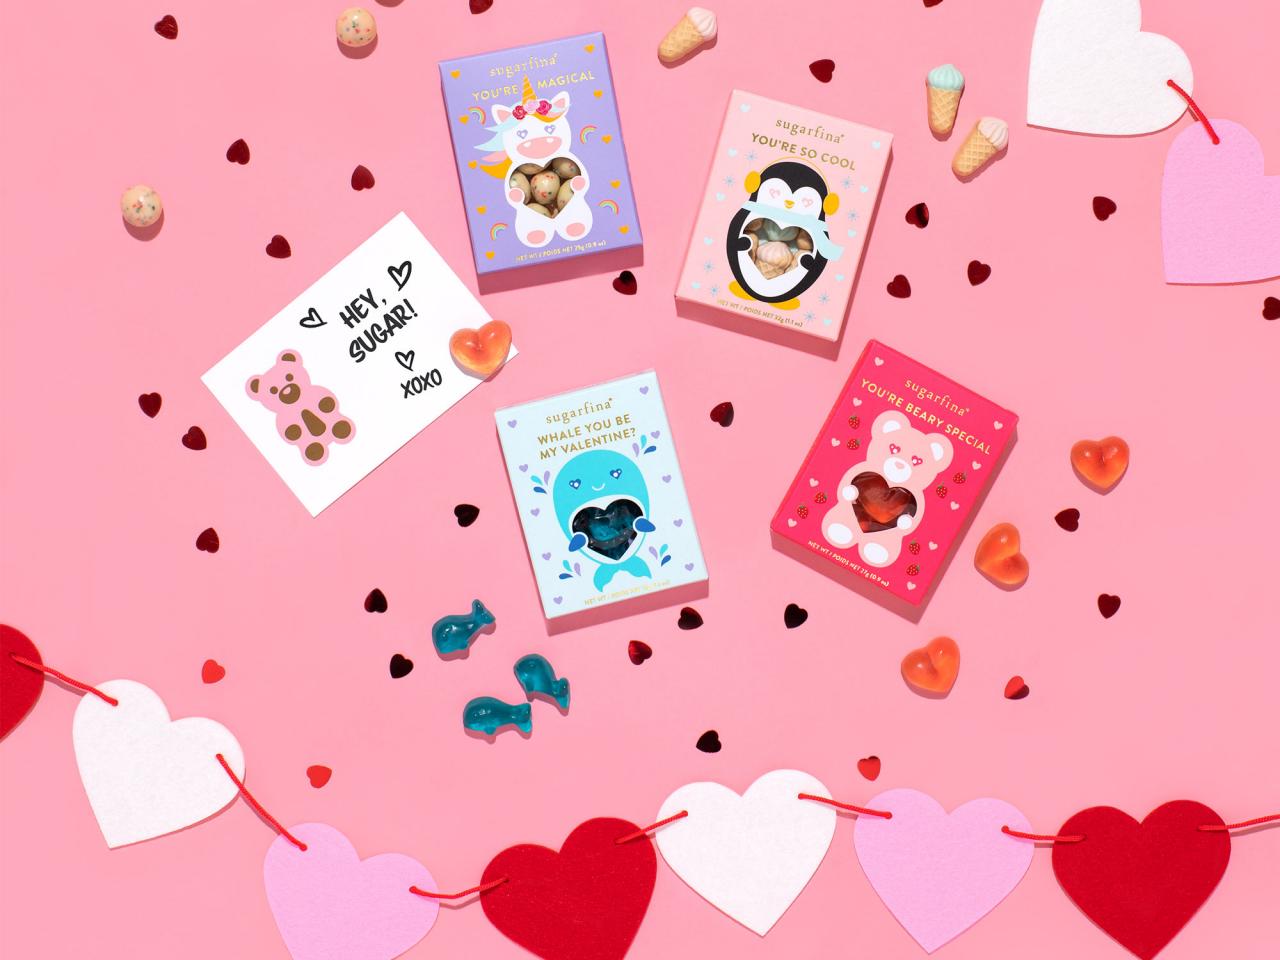 https://food.fnr.sndimg.com/content/dam/images/food/products/2023/1/19/rx_sugarfina-valentines-day-exchange-boxes_s4x3.jpg.rend.hgtvcom.1280.960.suffix/1674169182204.jpeg